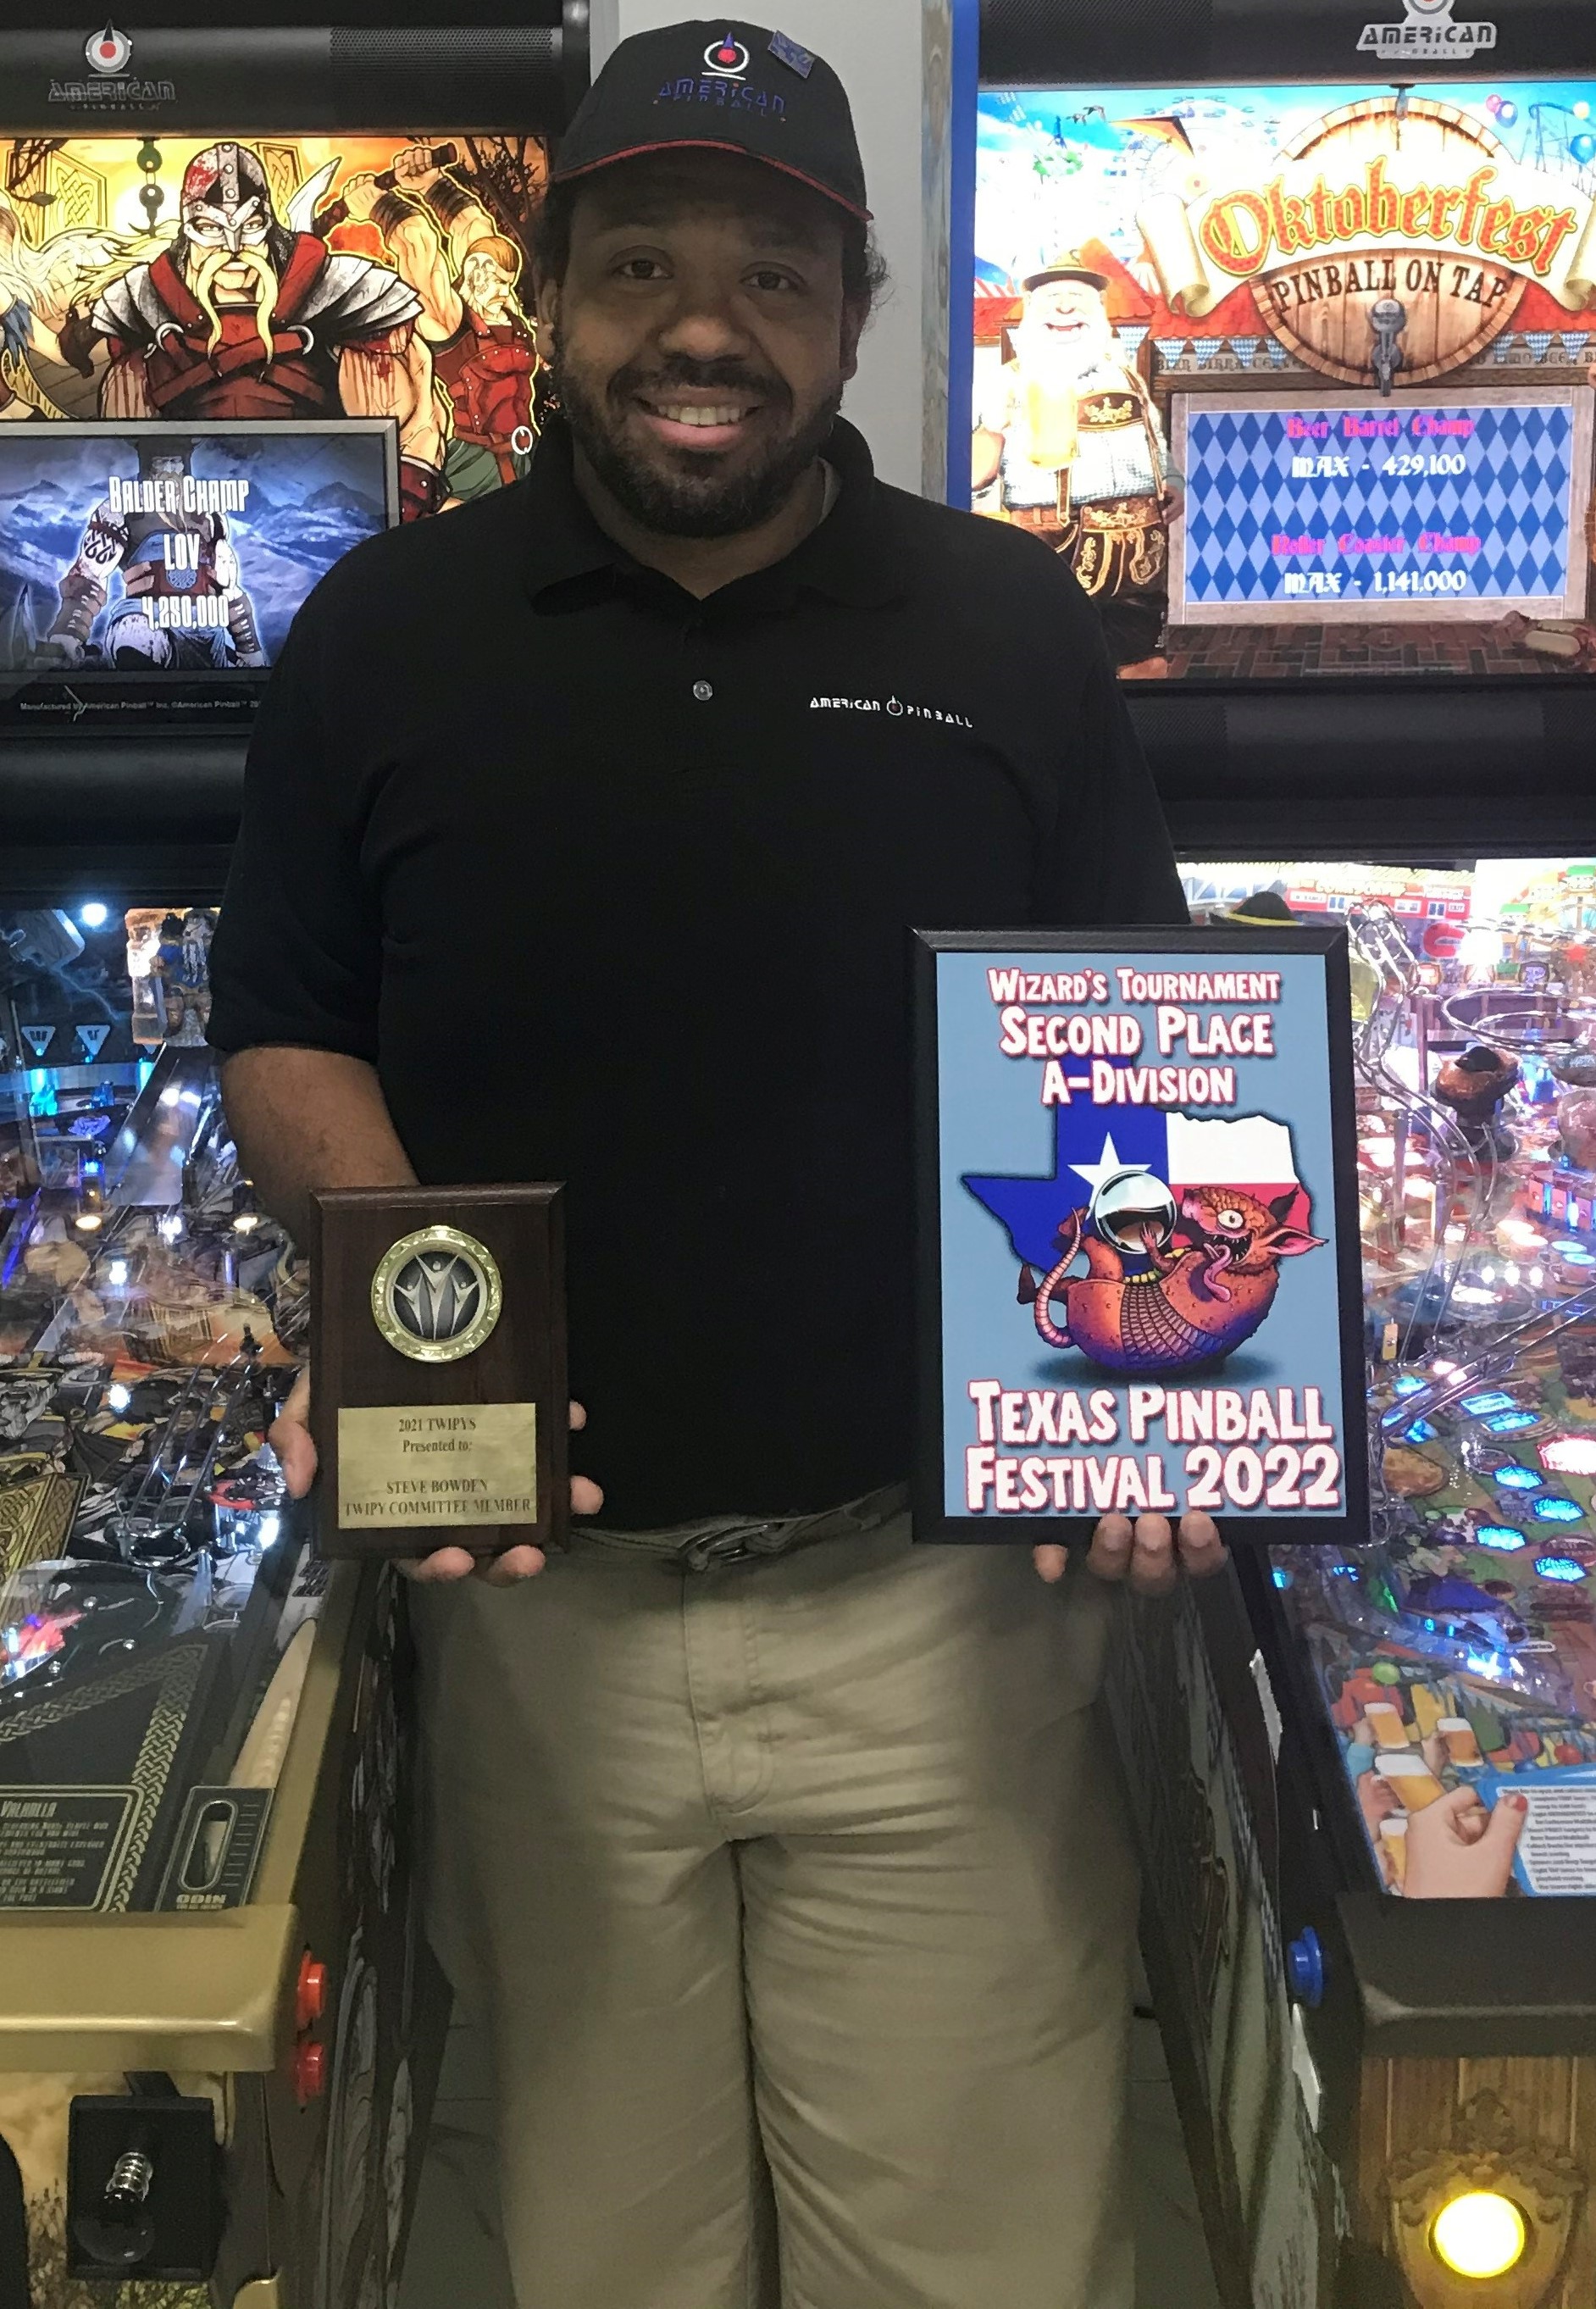 Special thanks to This Week in Pinball and Texas Pinball Festival